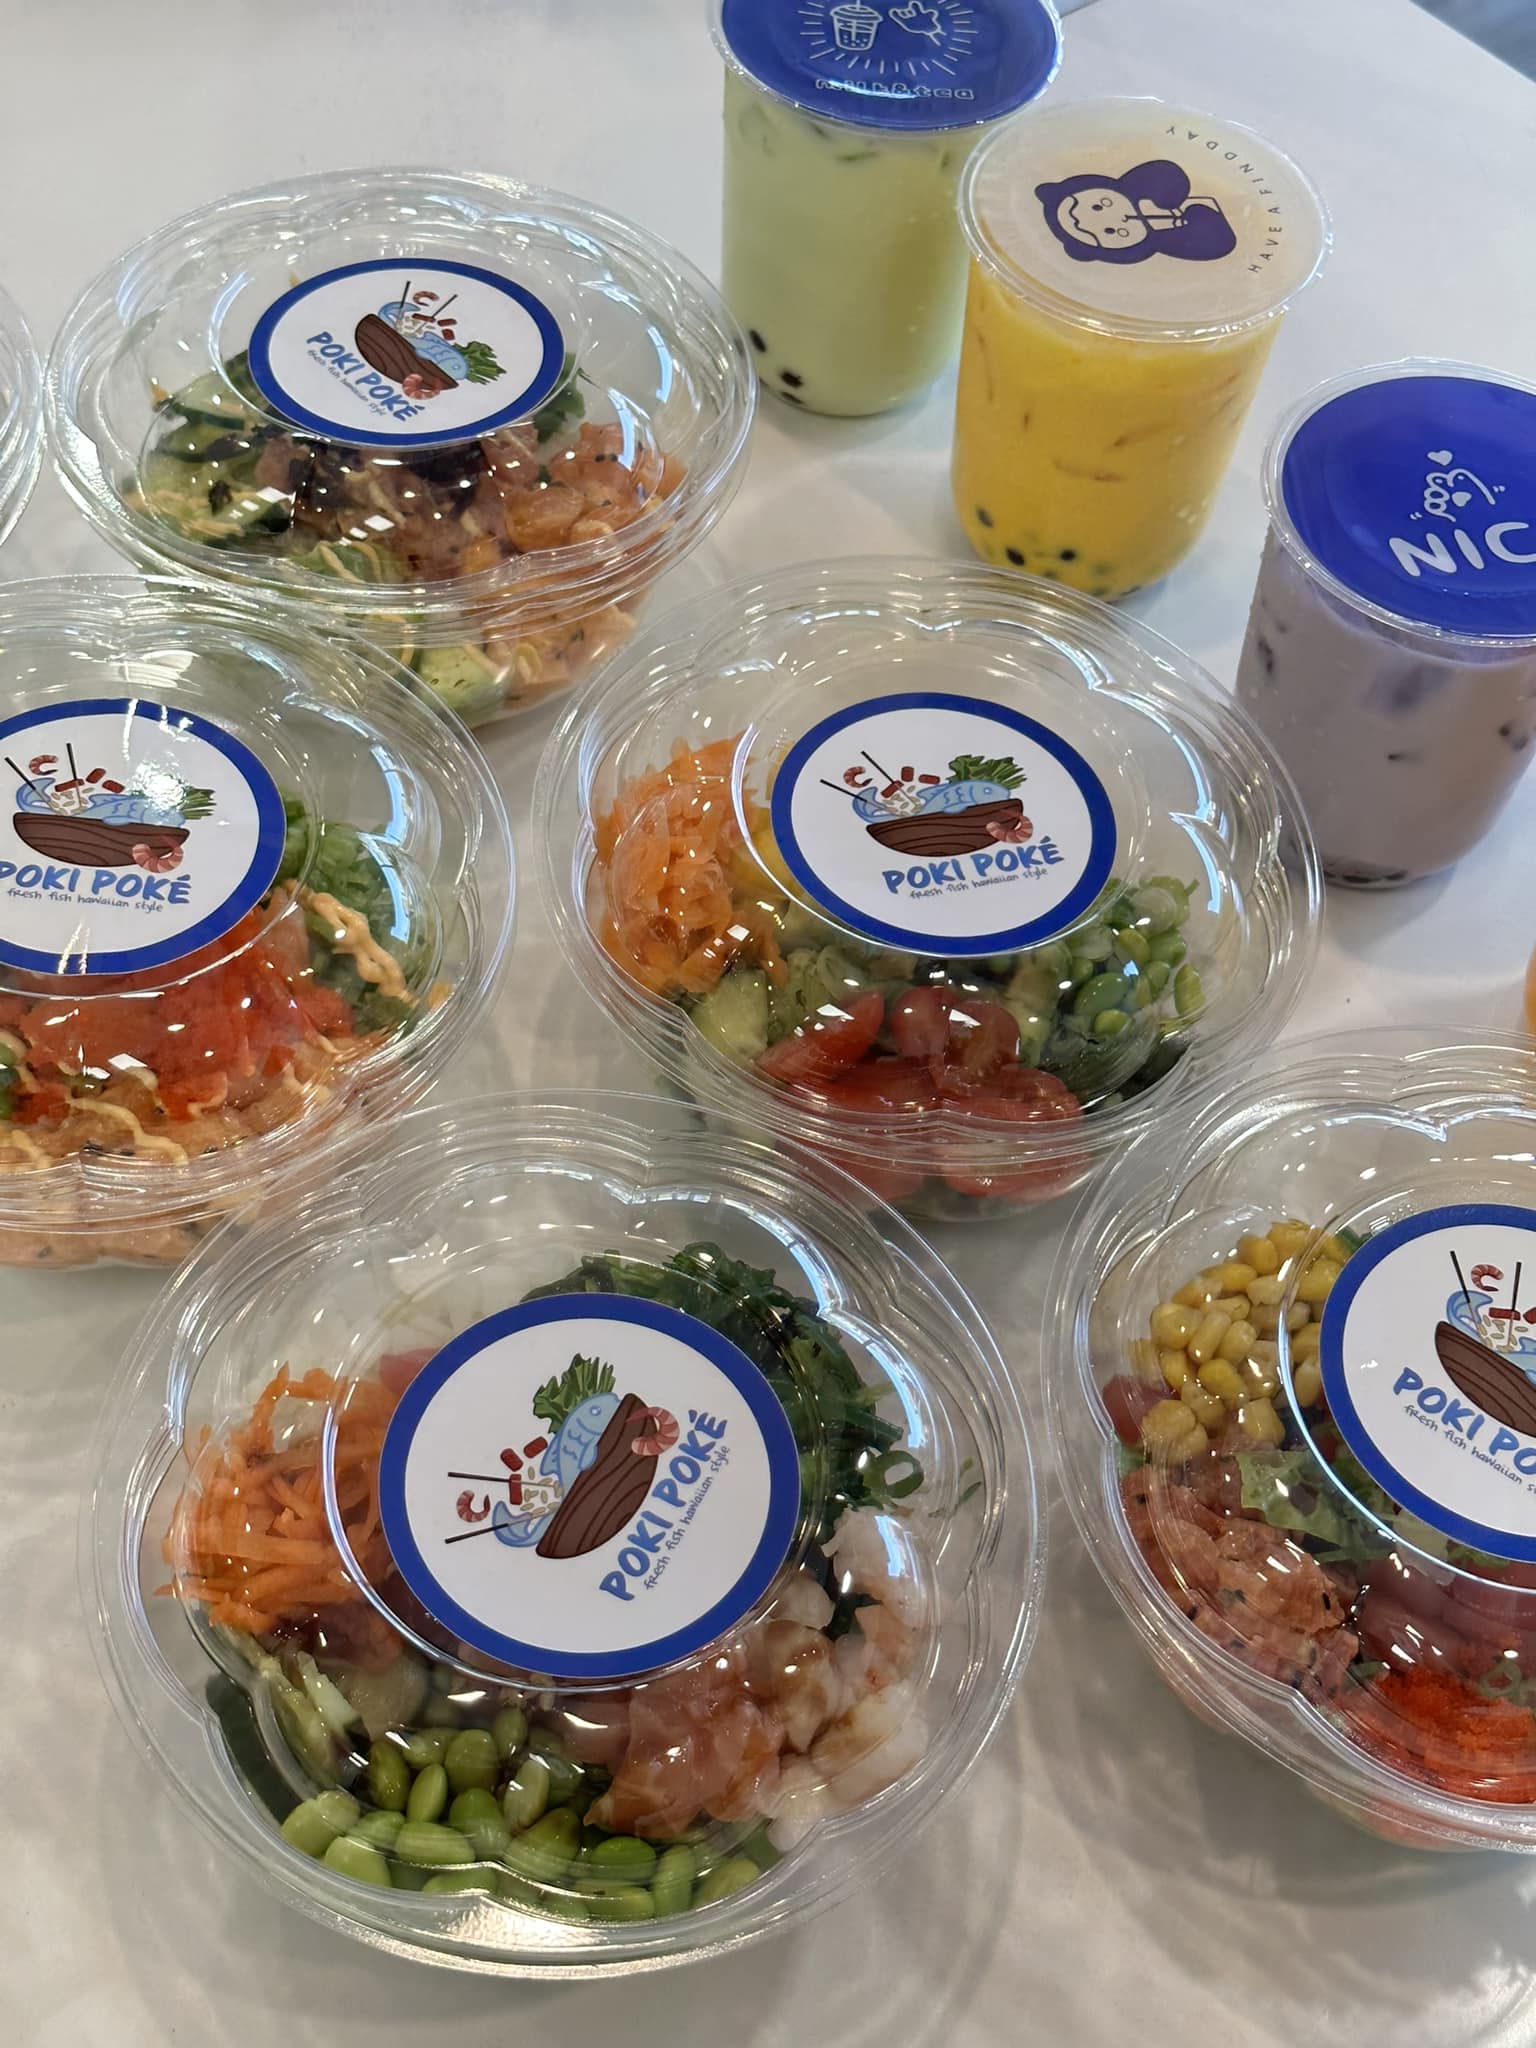 Prepackaged Poke bowls and three boba drinks with Poke Poke labeling.